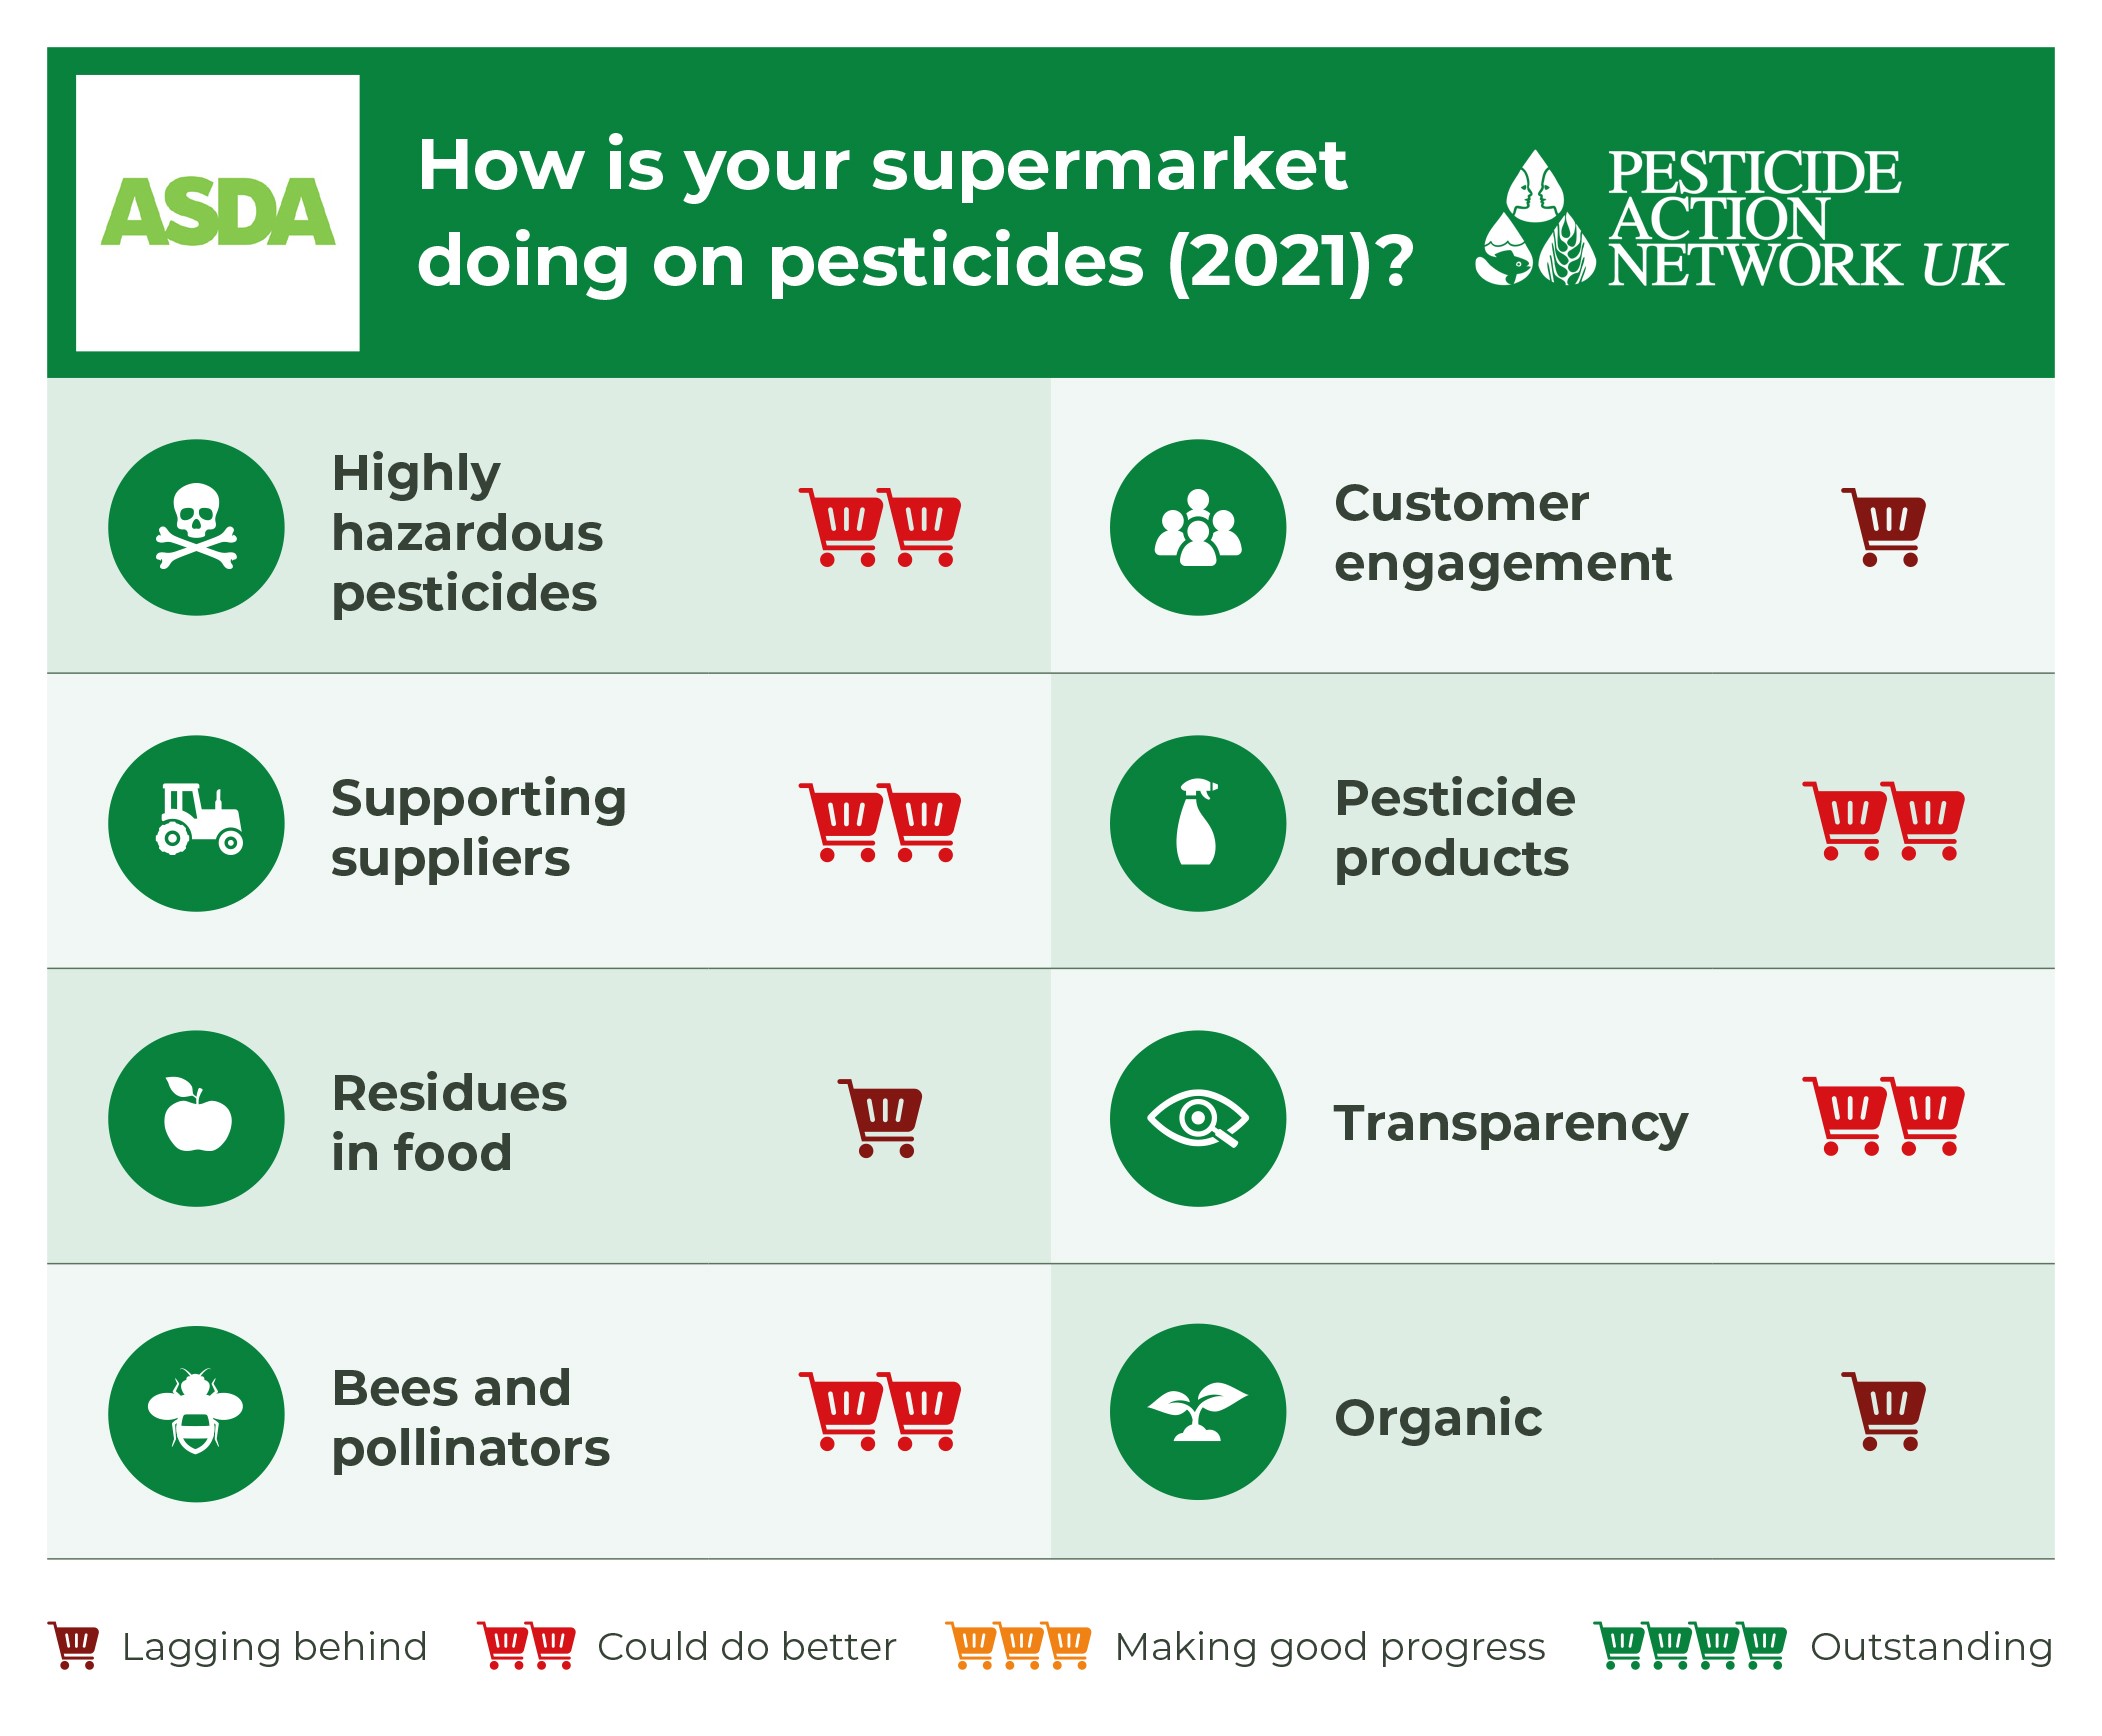 How is Asda doing on pesticides?